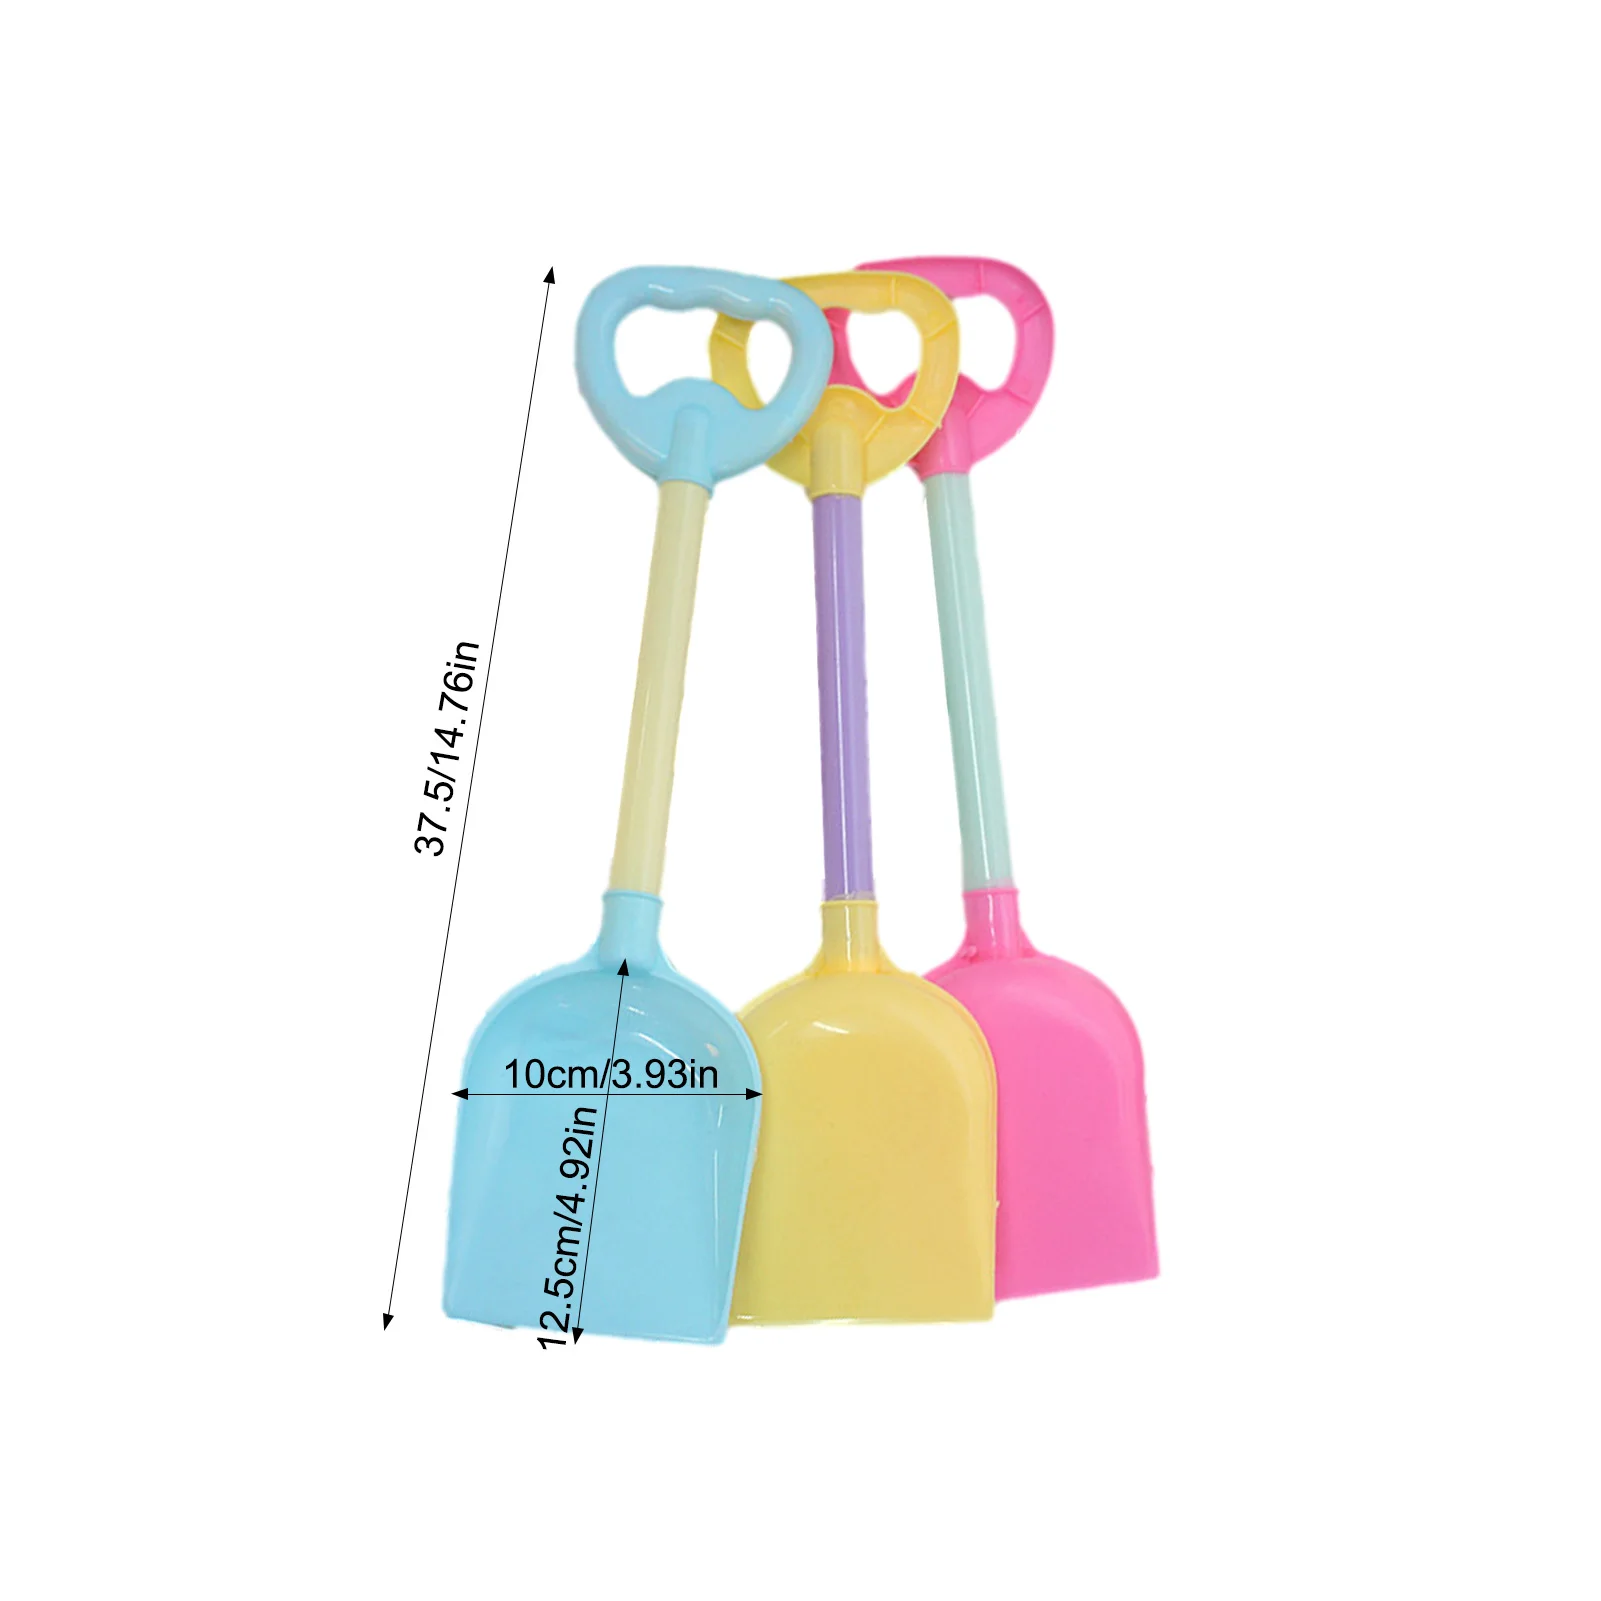 1PC Beach Sand Shovel Toys Safe Plastic Spades Gardening Digging Tool Play Sand Tool Playing Shovels Light Weight Tool Beach Toy